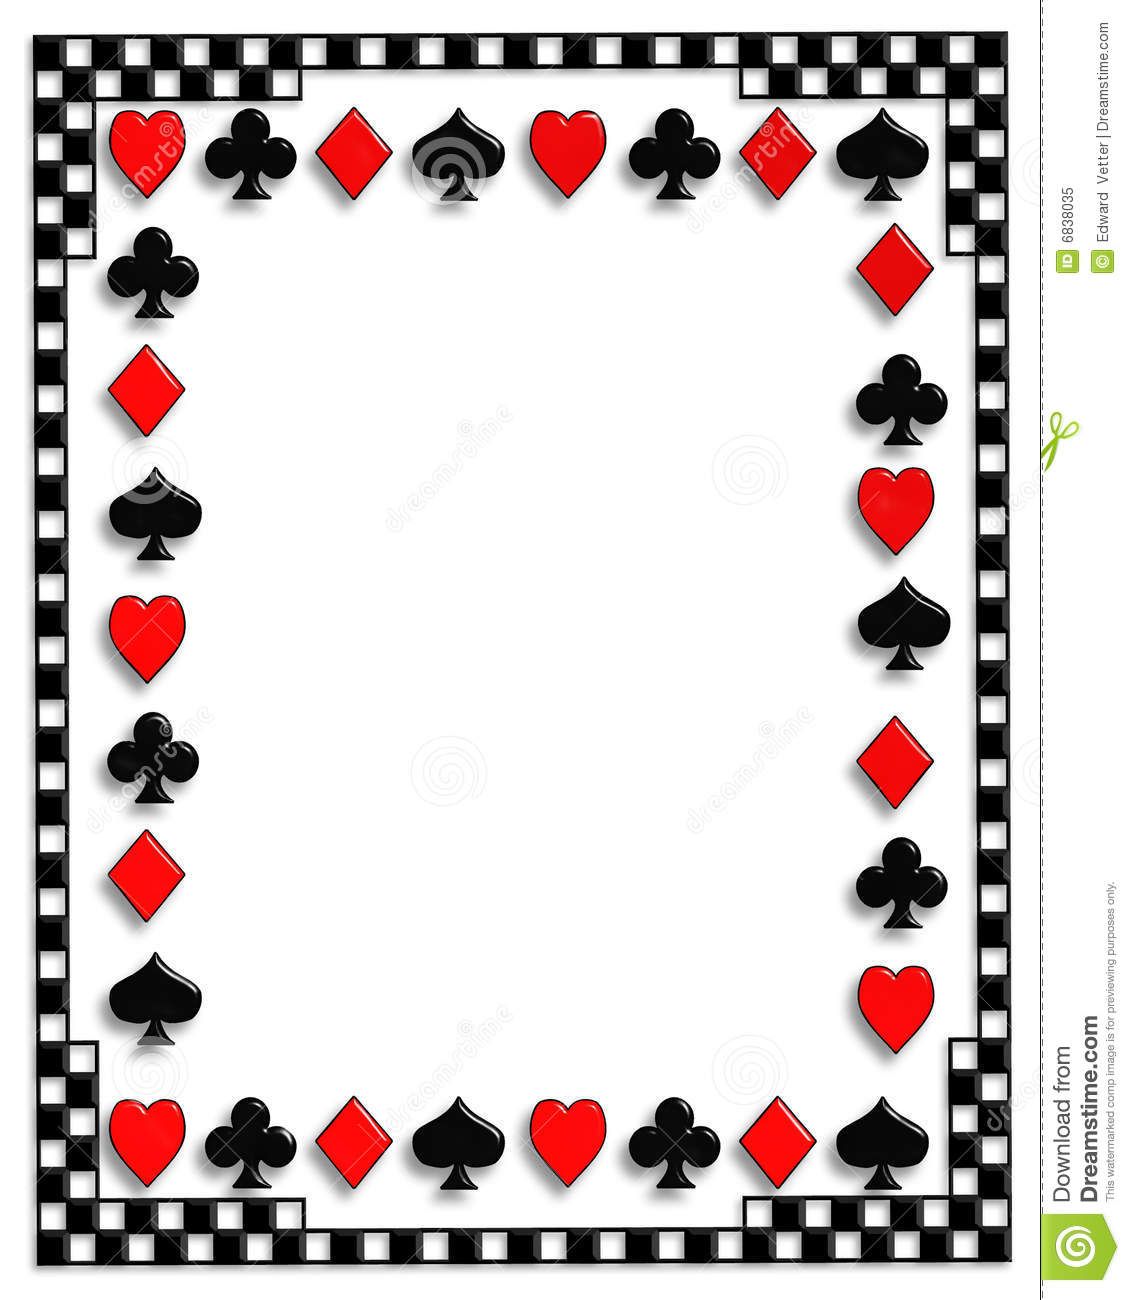 Playing Card Images Free